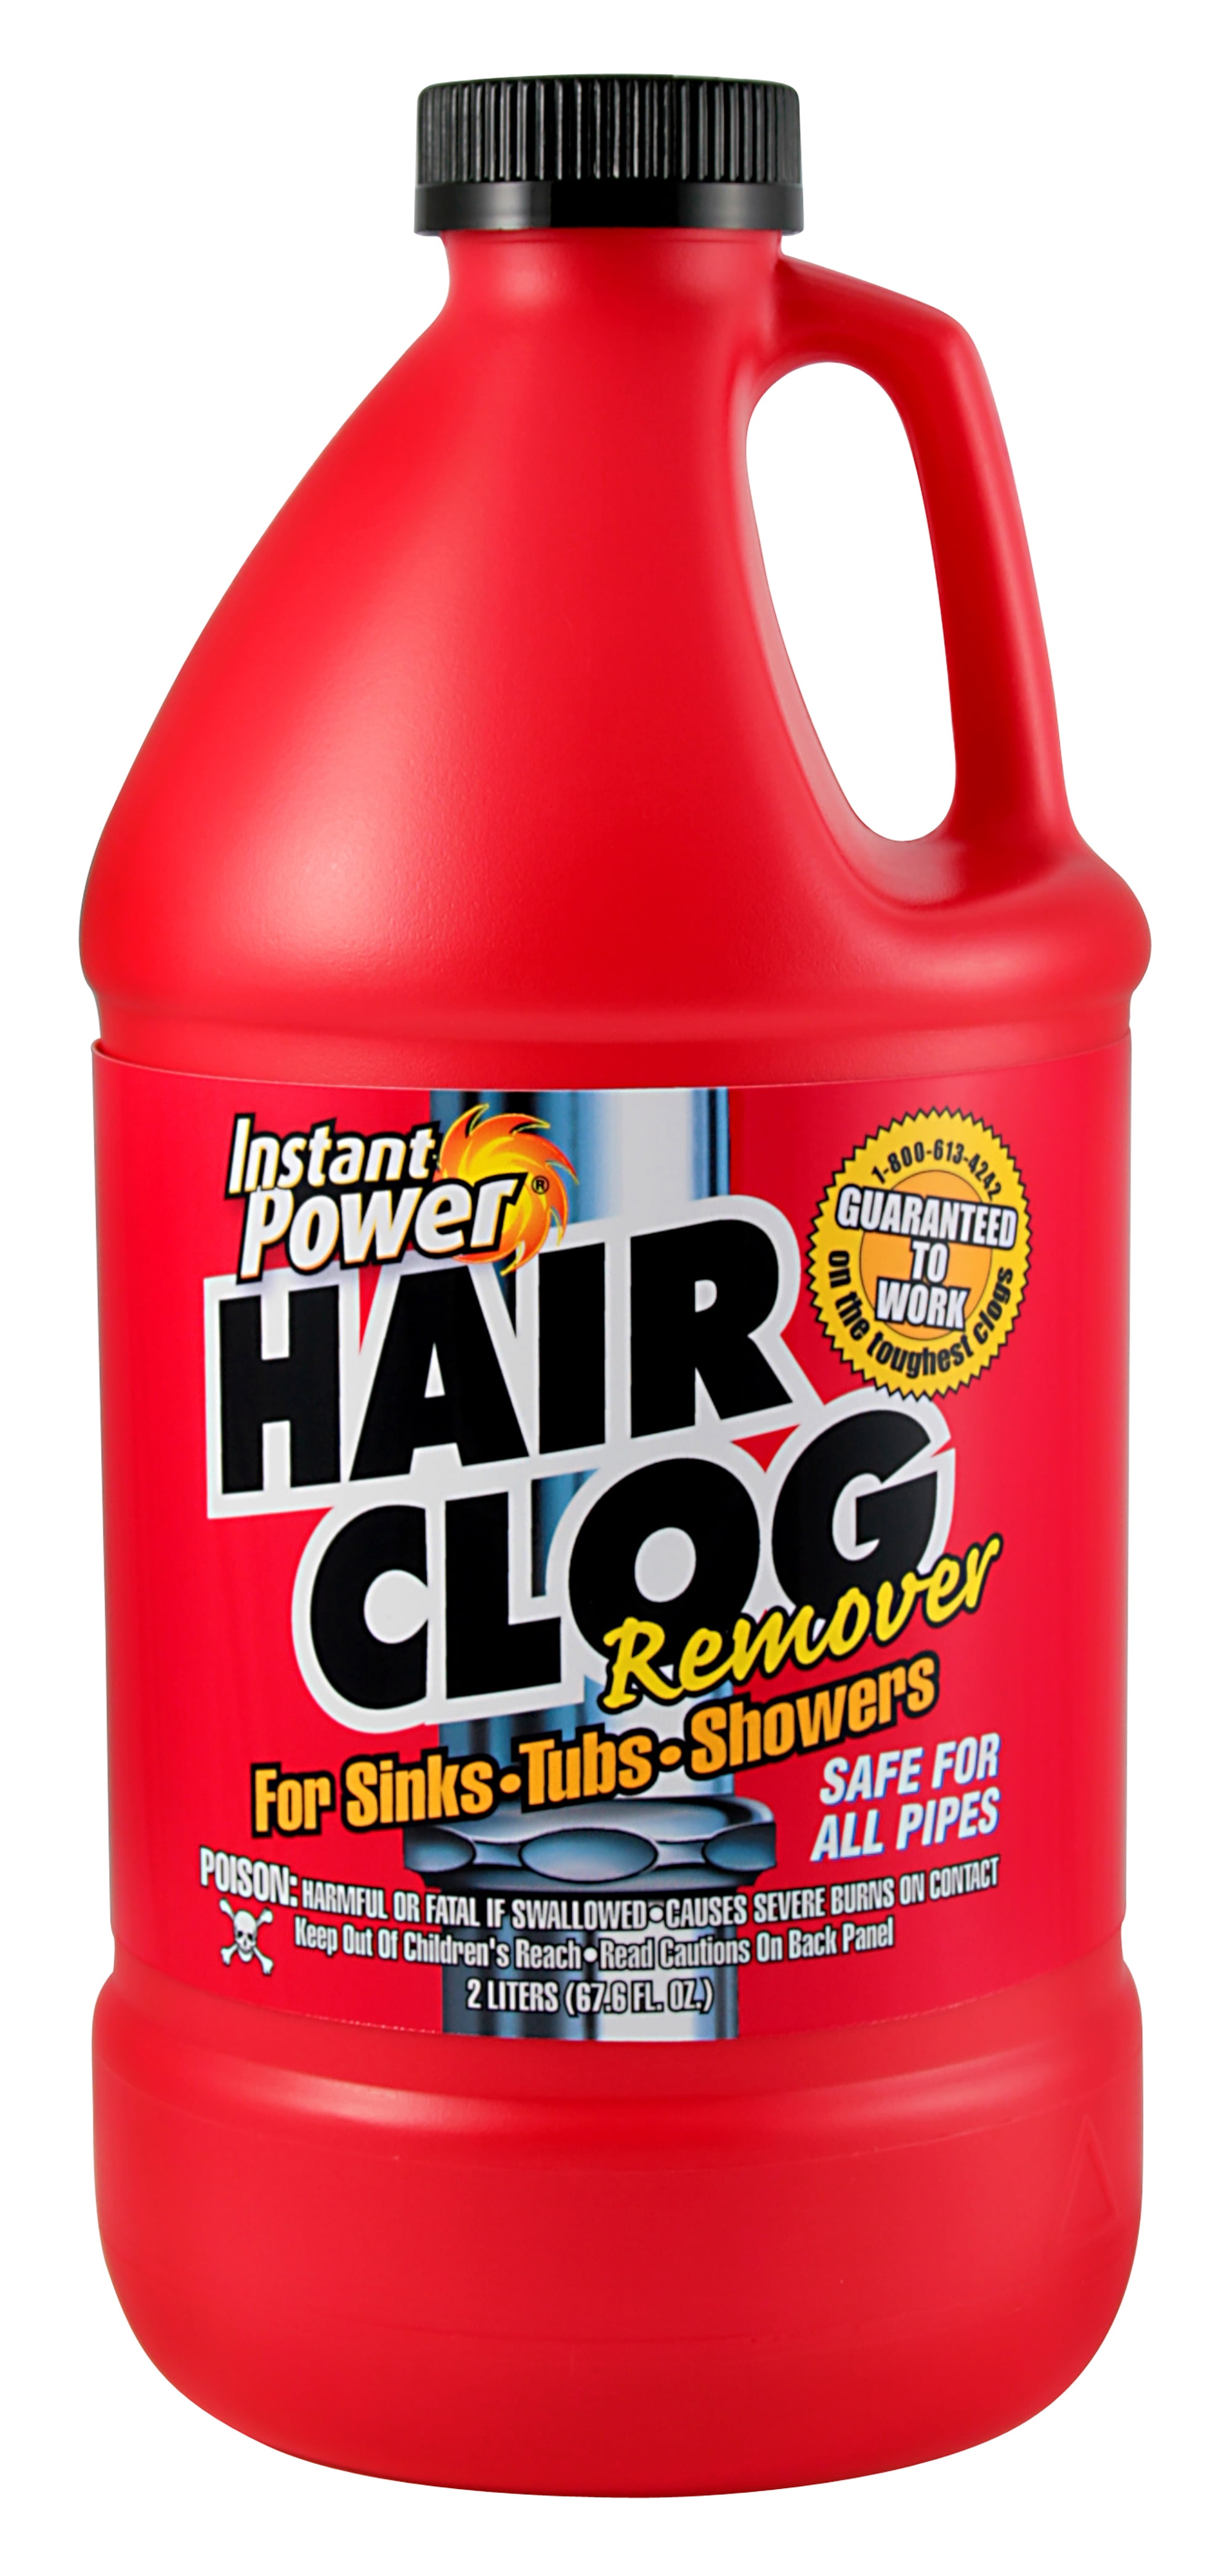 Instant Power Hair Clog Remover 67 Oz, How To Get Hair Clog Out Of Bathtub Drain